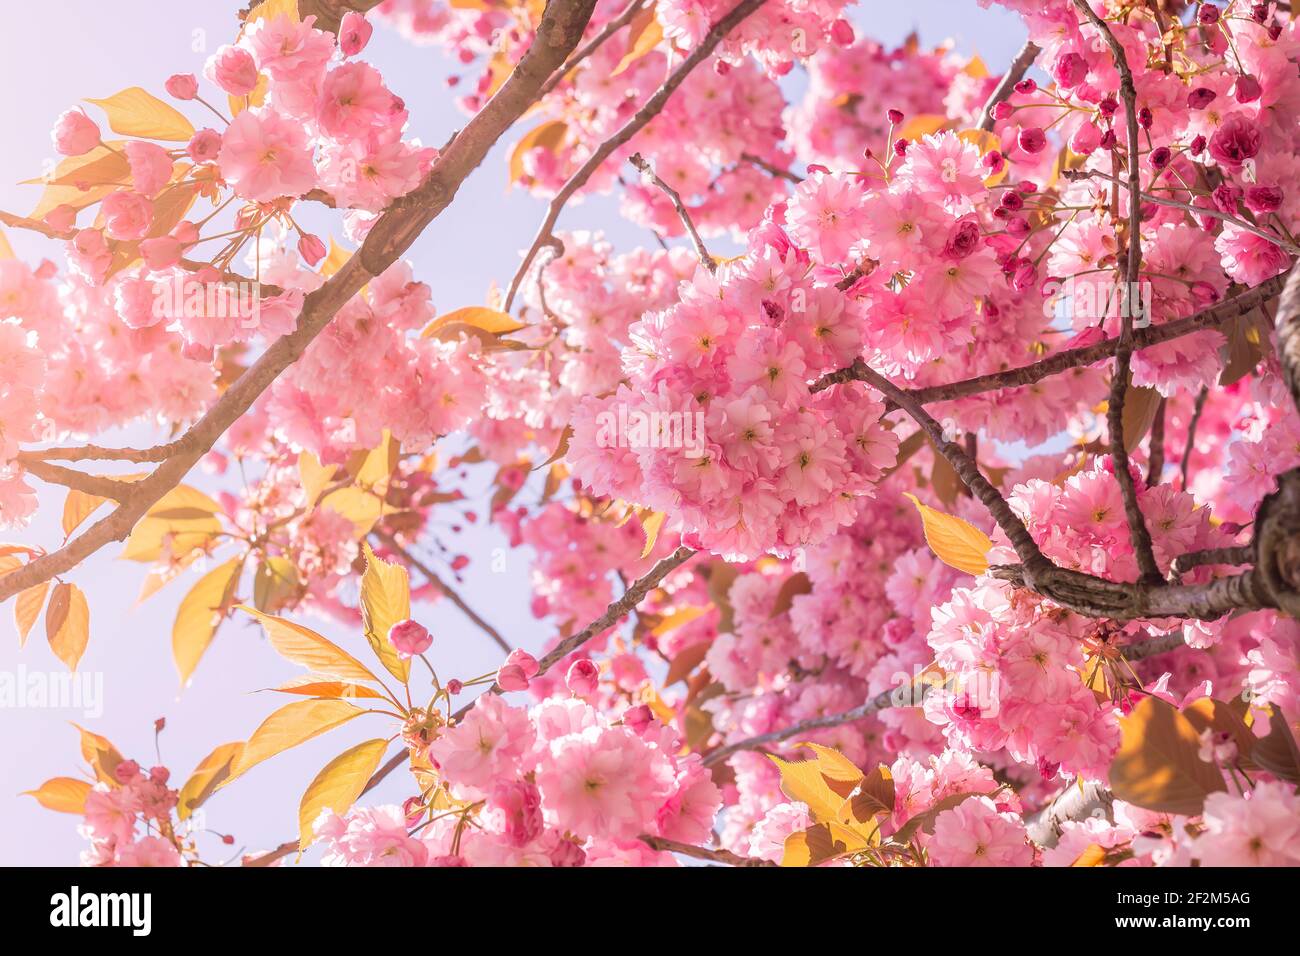 Prunus serrulata or japanese cherry tree cherry blossoms pink flowers blooming in spring Stock Photo